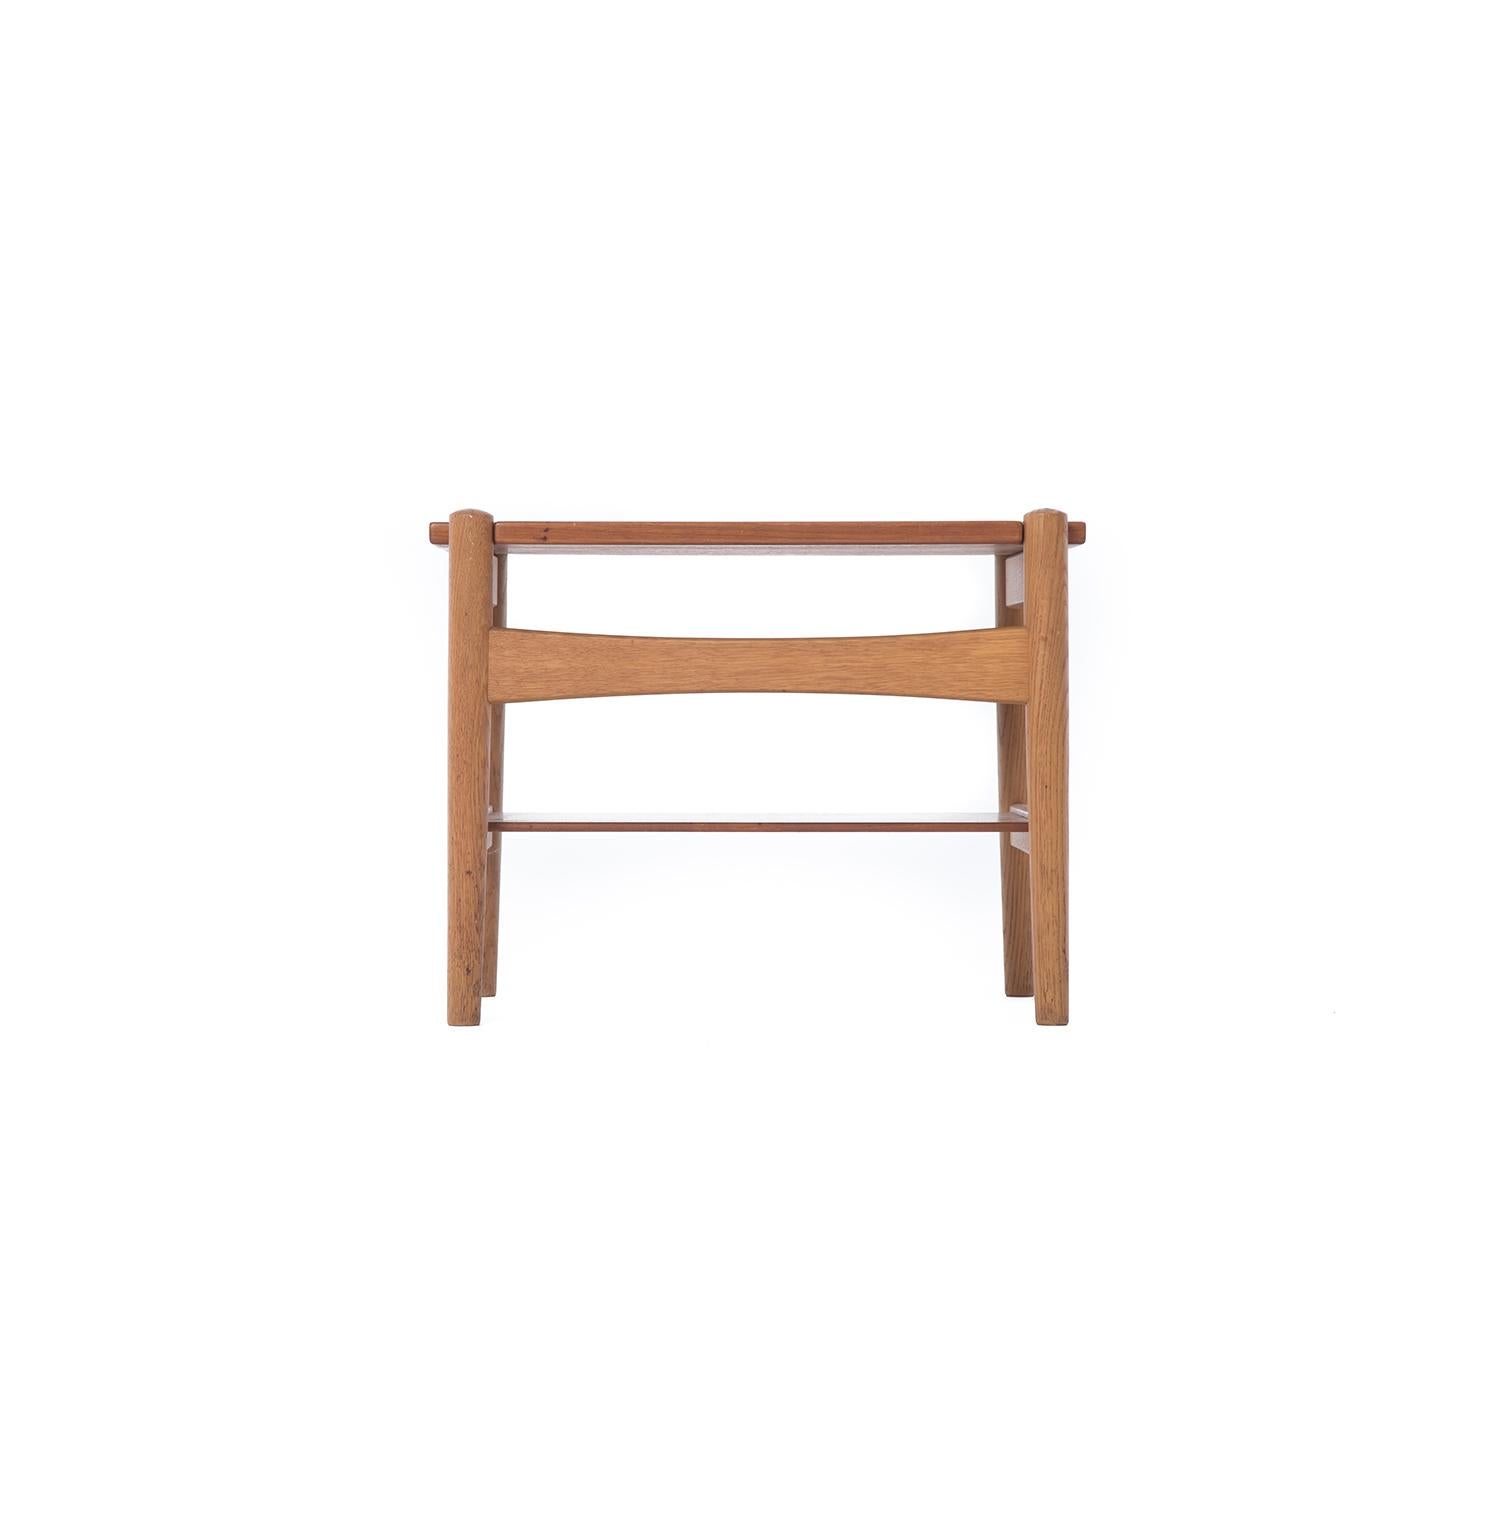 This petite Hans Wegner side table features a teak top and shelf set on an oak frame.